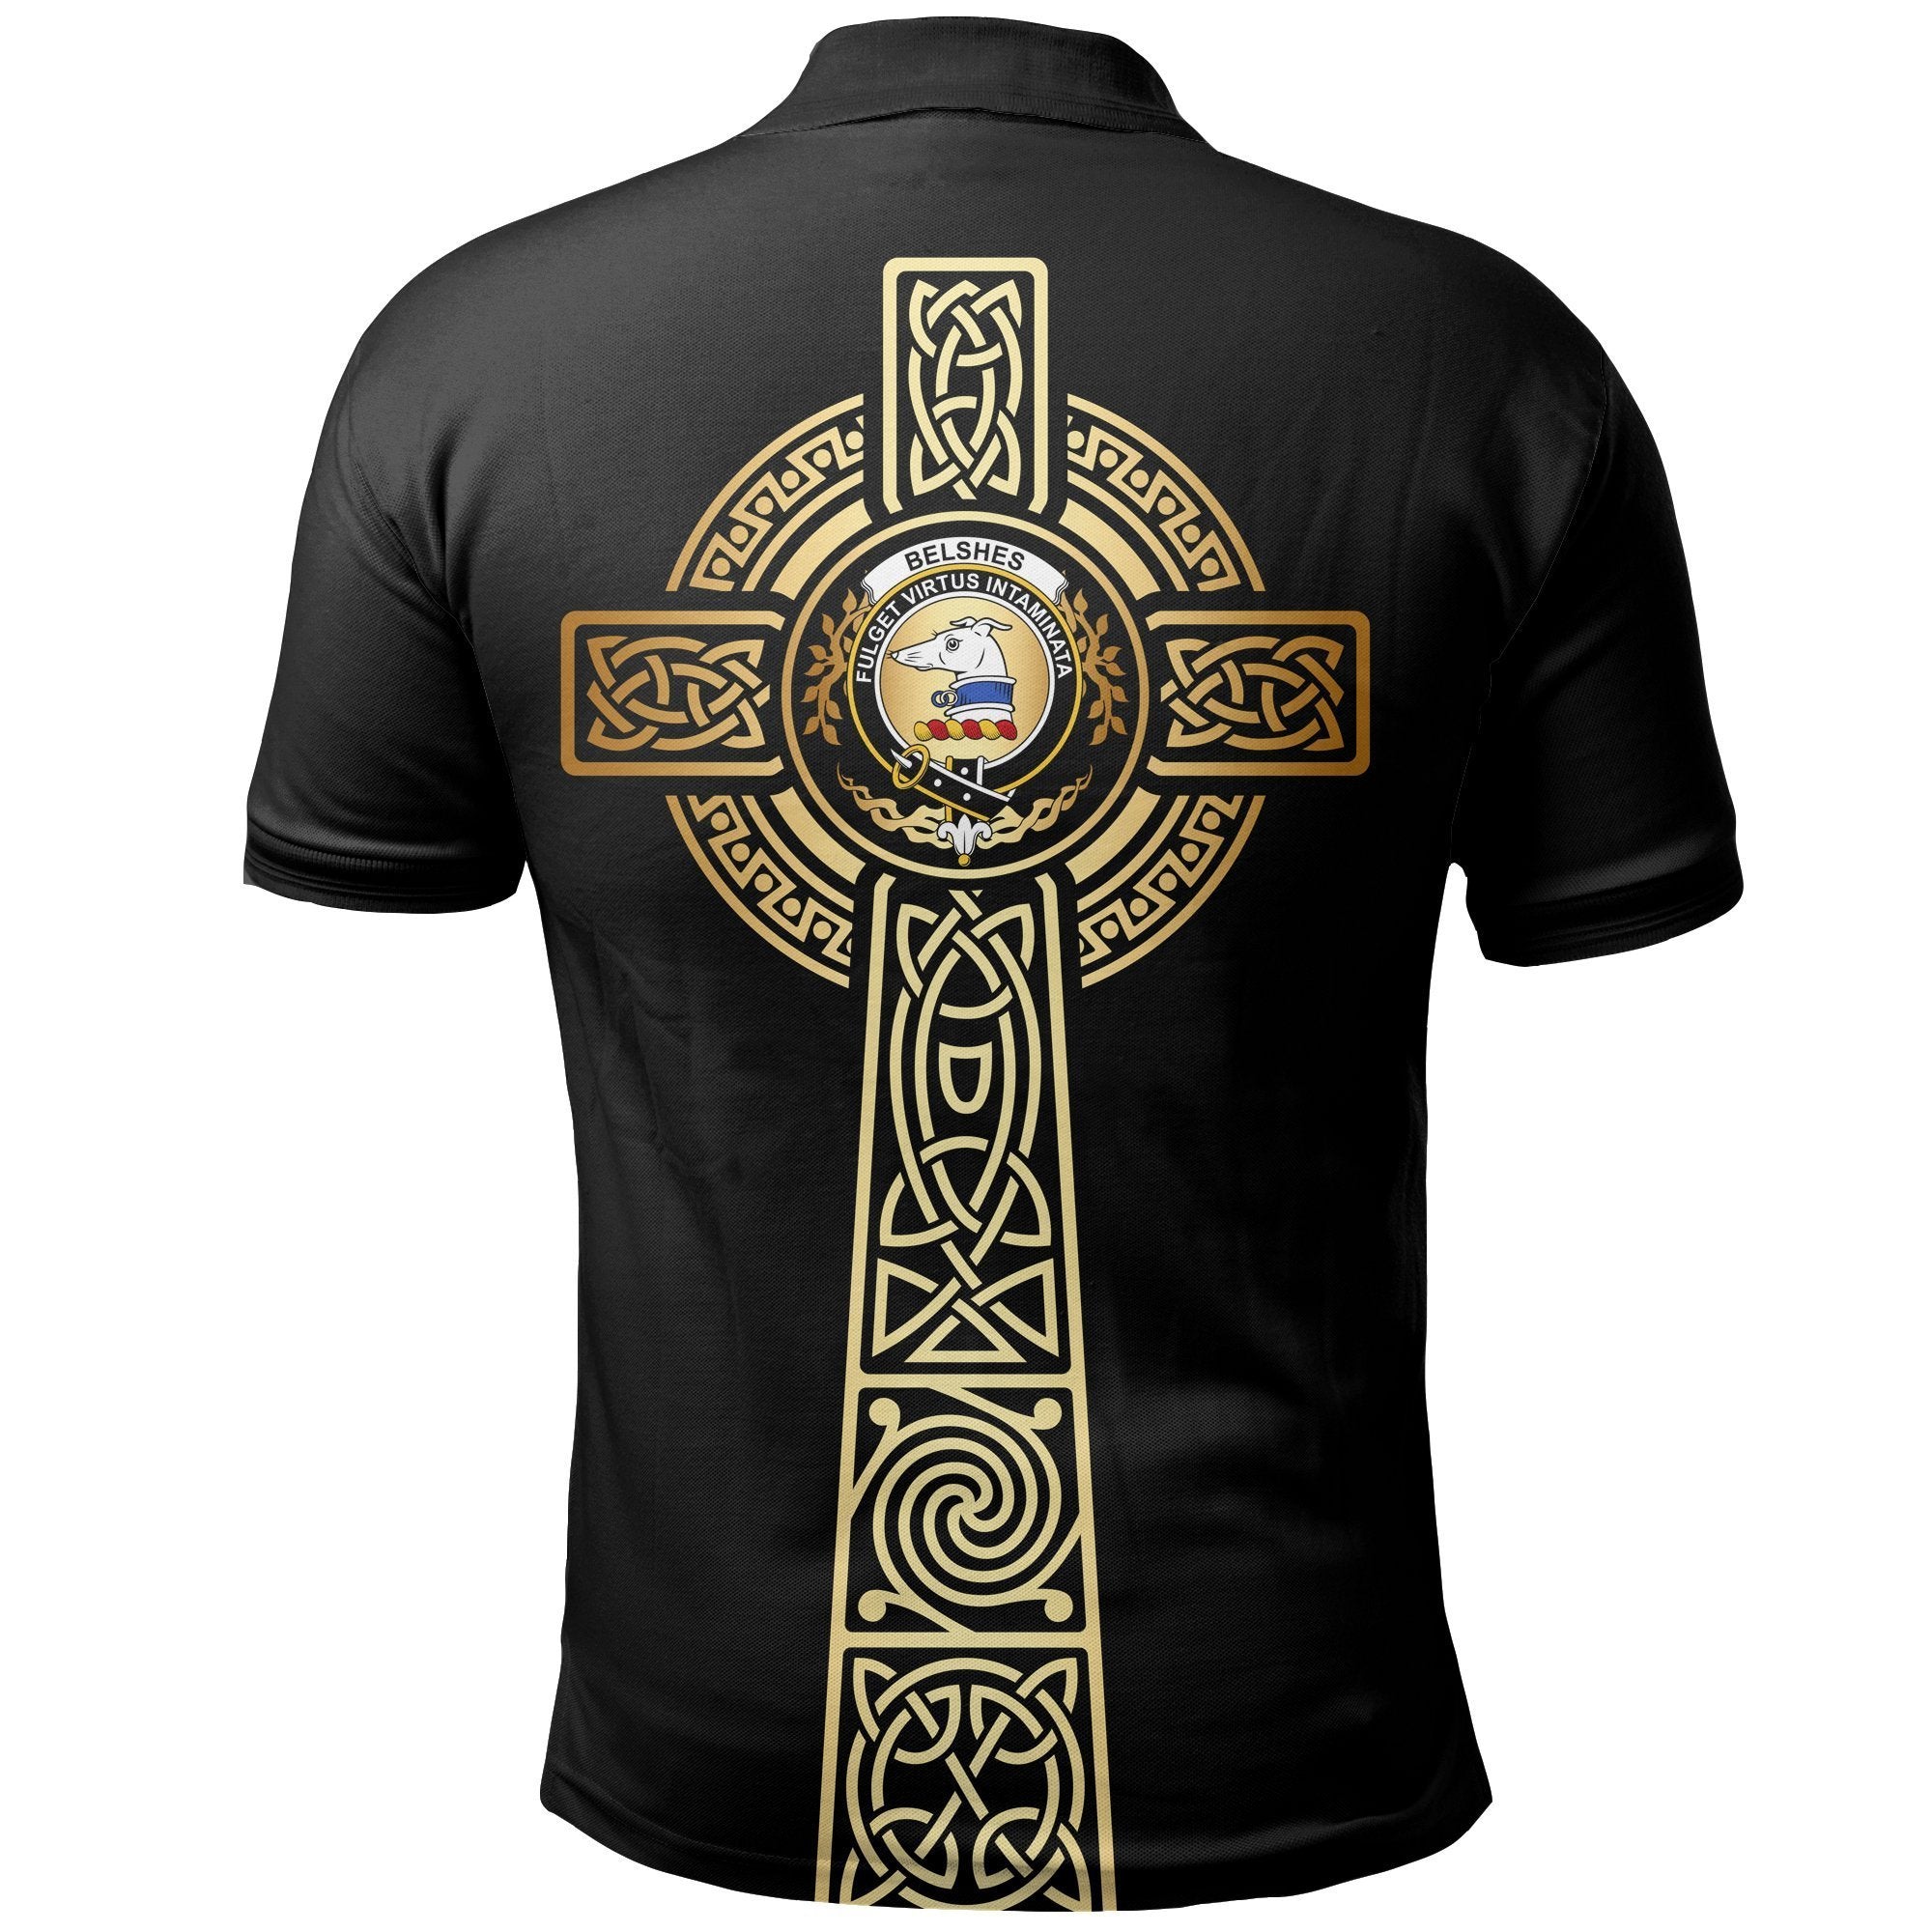 Belshes (or Belsches) Clan Unisex Polo Shirt - Celtic Tree Of Life